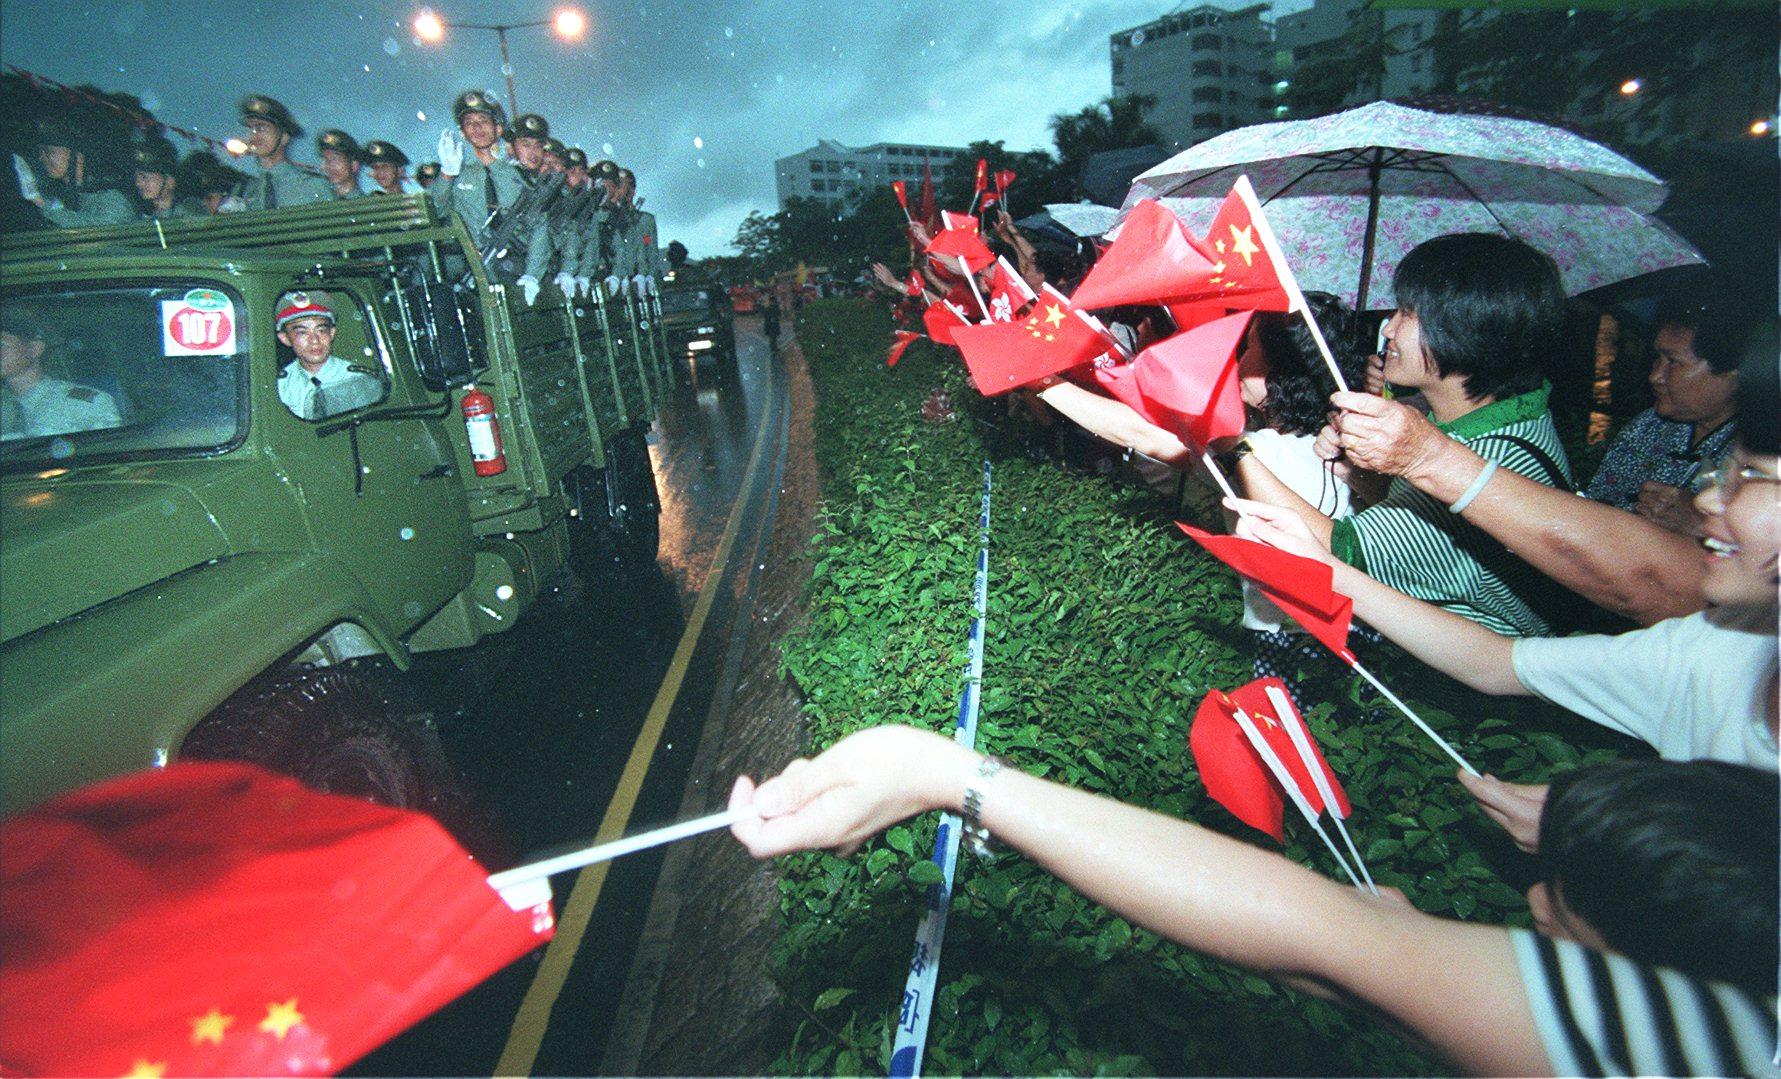 Residents of Sheung Shui greet People’s Liberation Army soldiers who entered Hong Kong on July 1, 1997. Photo: Oliver Tsang